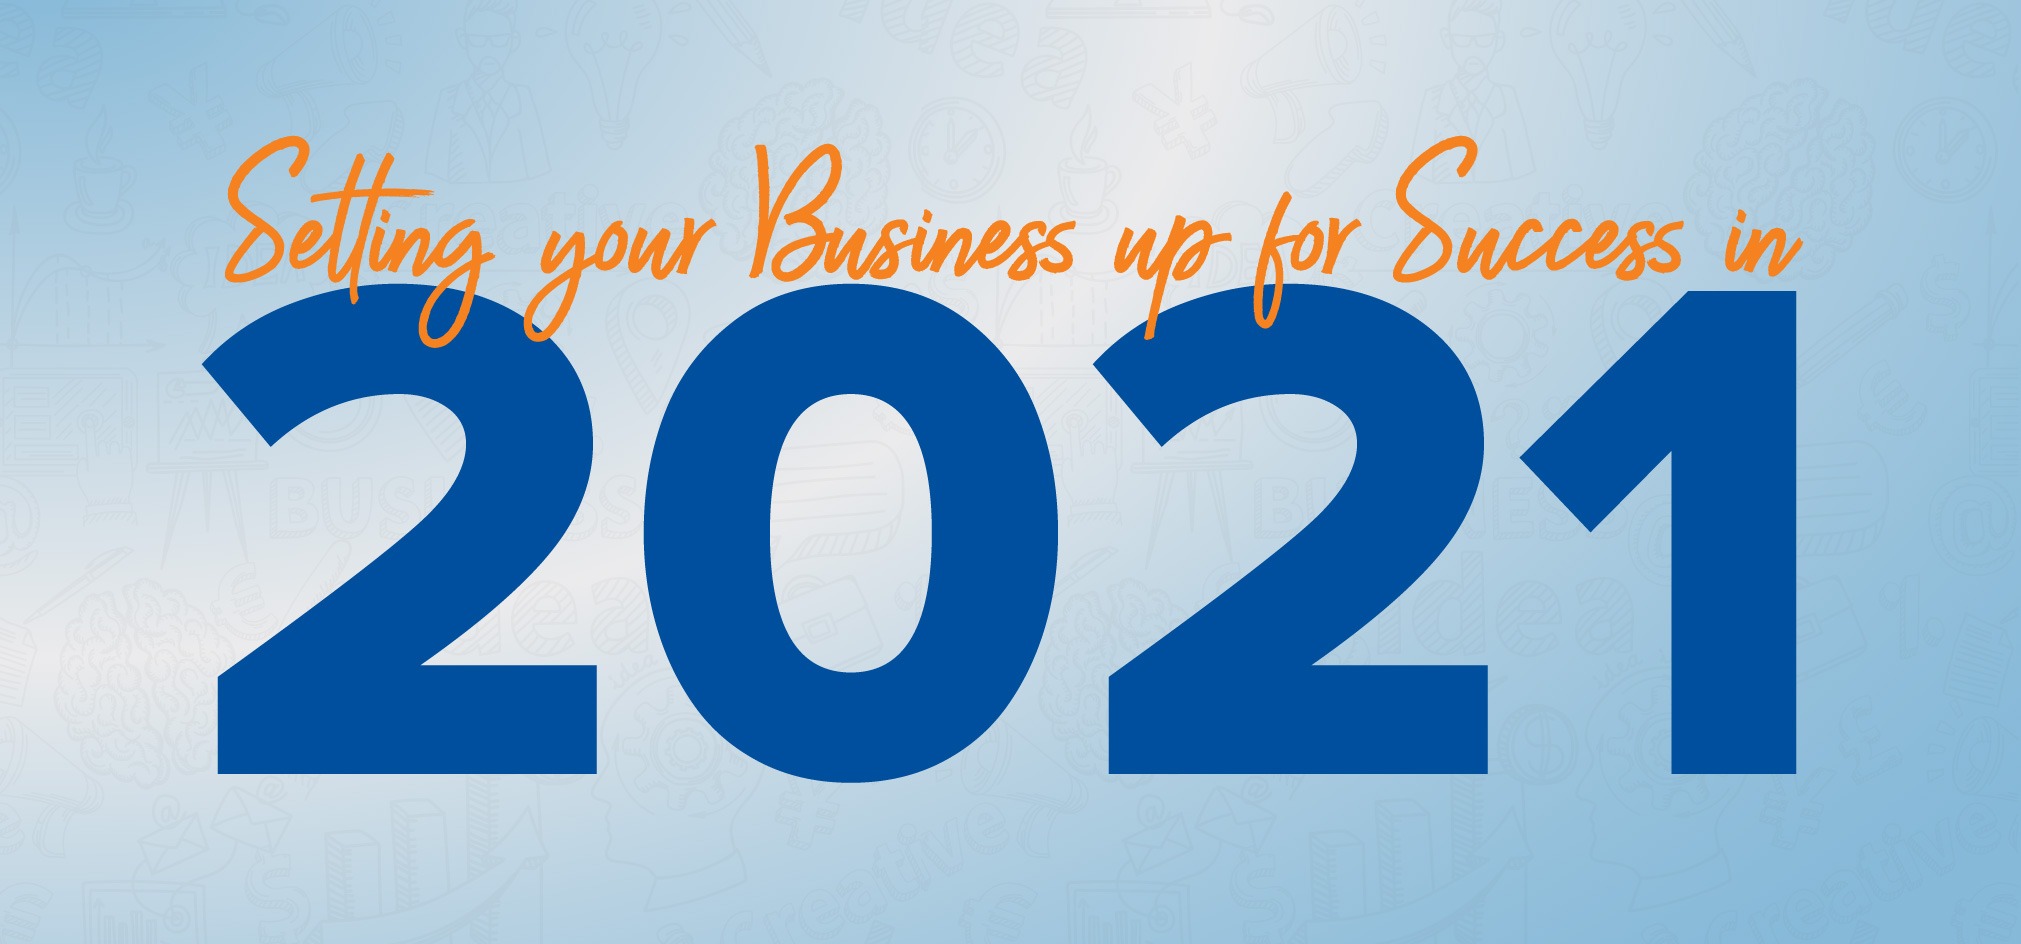 Setting your Business up for Success in 2021